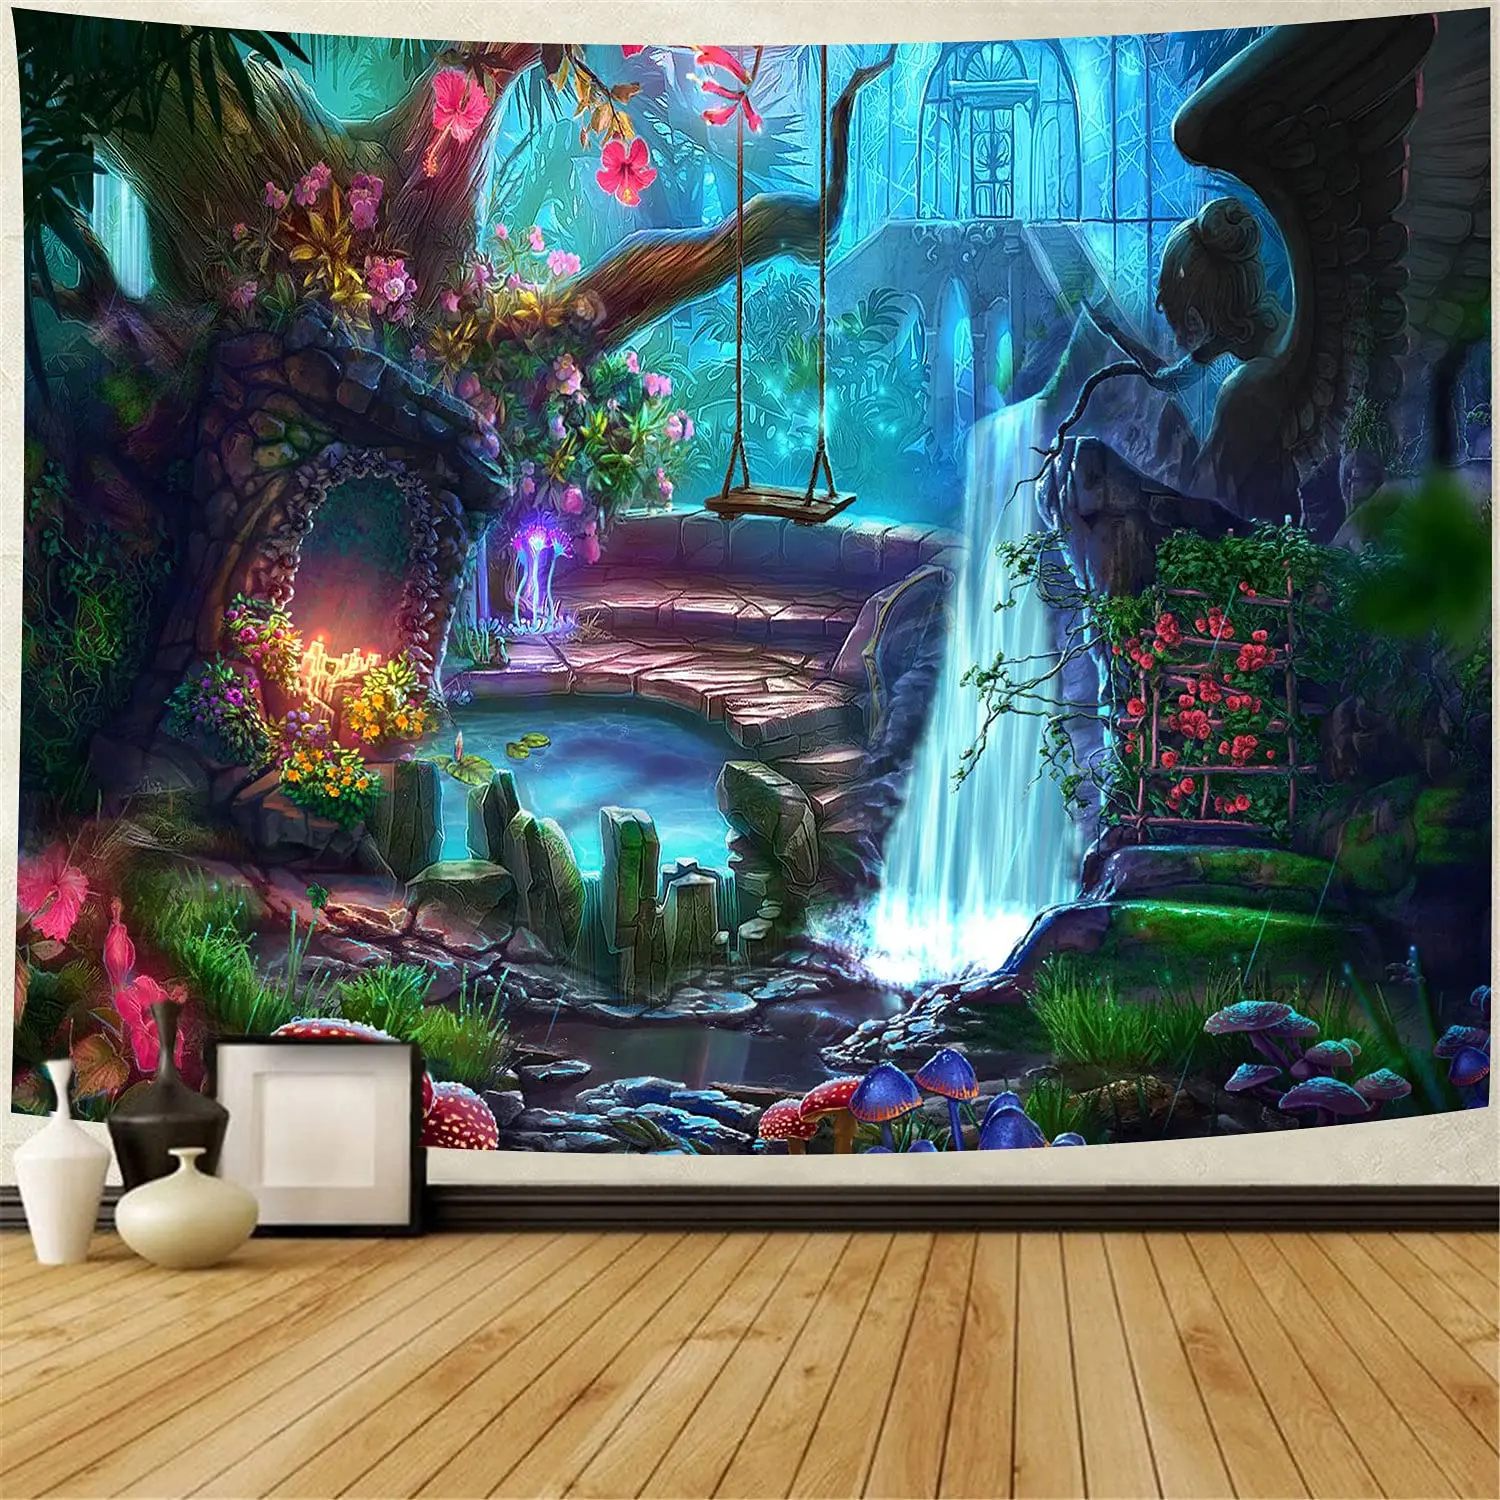 

Enchanted Forest Plant Tapestry Fantasy Mysterious Tree River Waterfall Wall Hanging Bedroom Home Decor Living Room Dorm Cloth